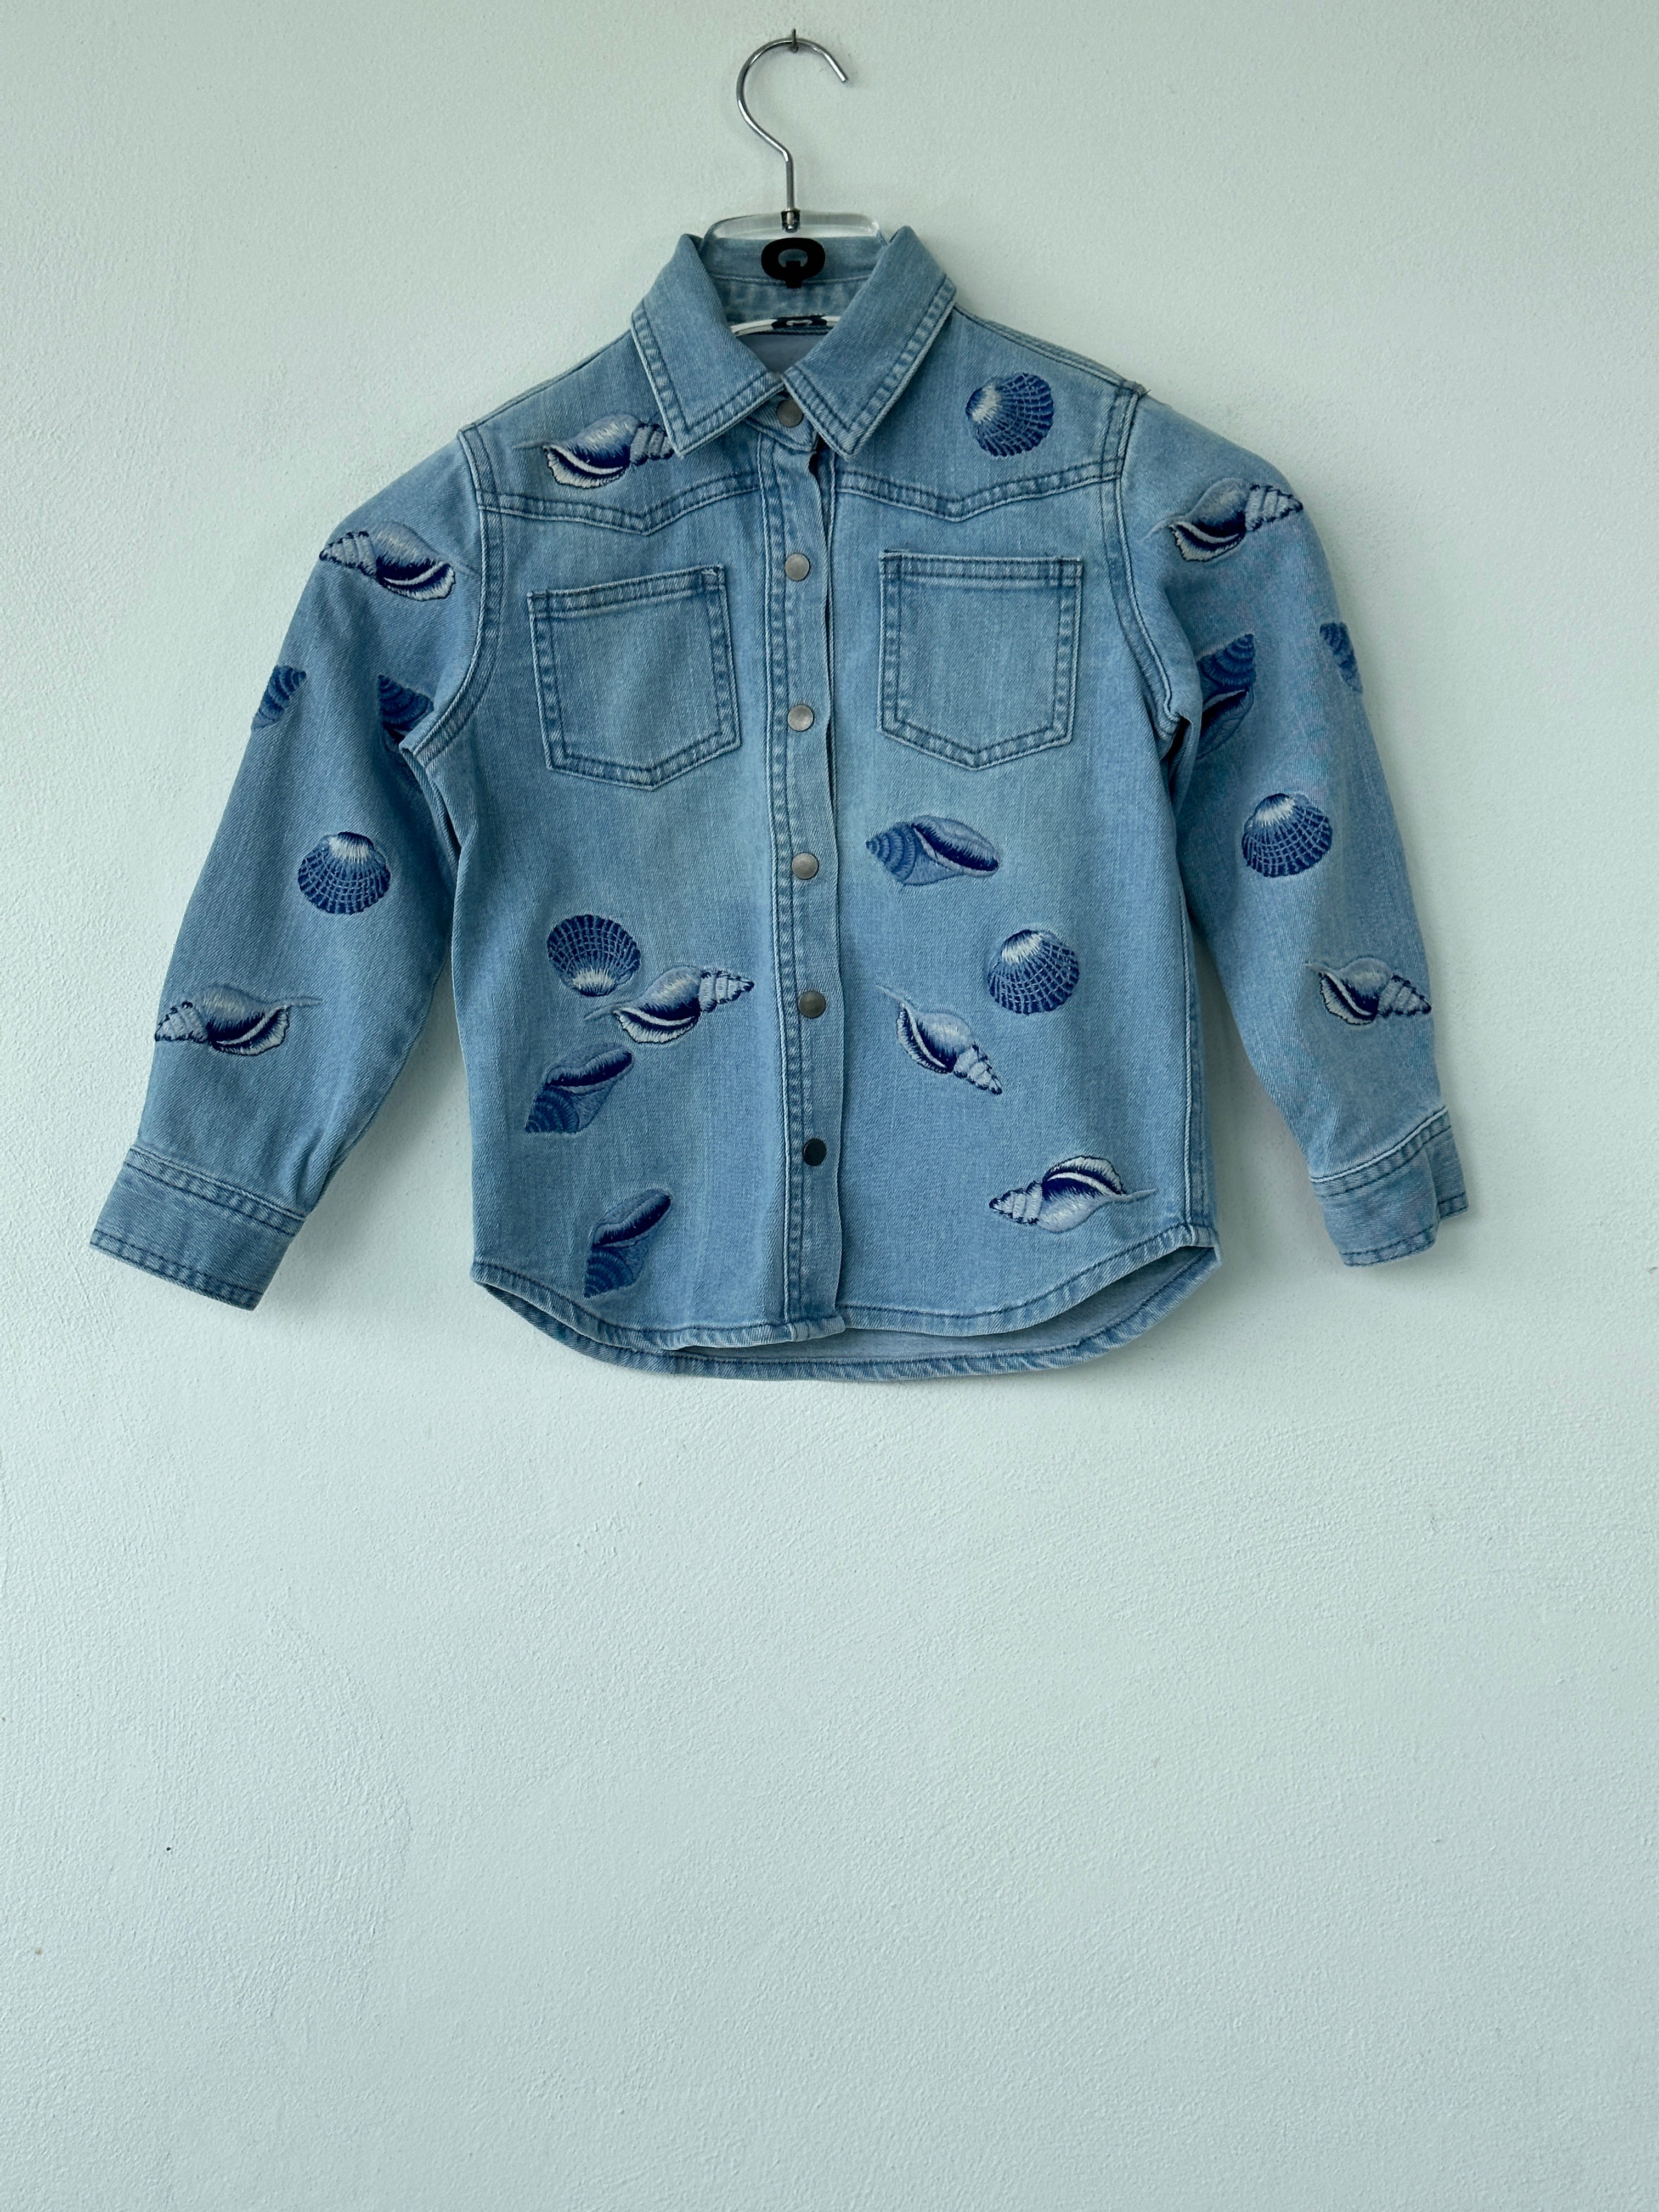 Shell Jacket Jeans